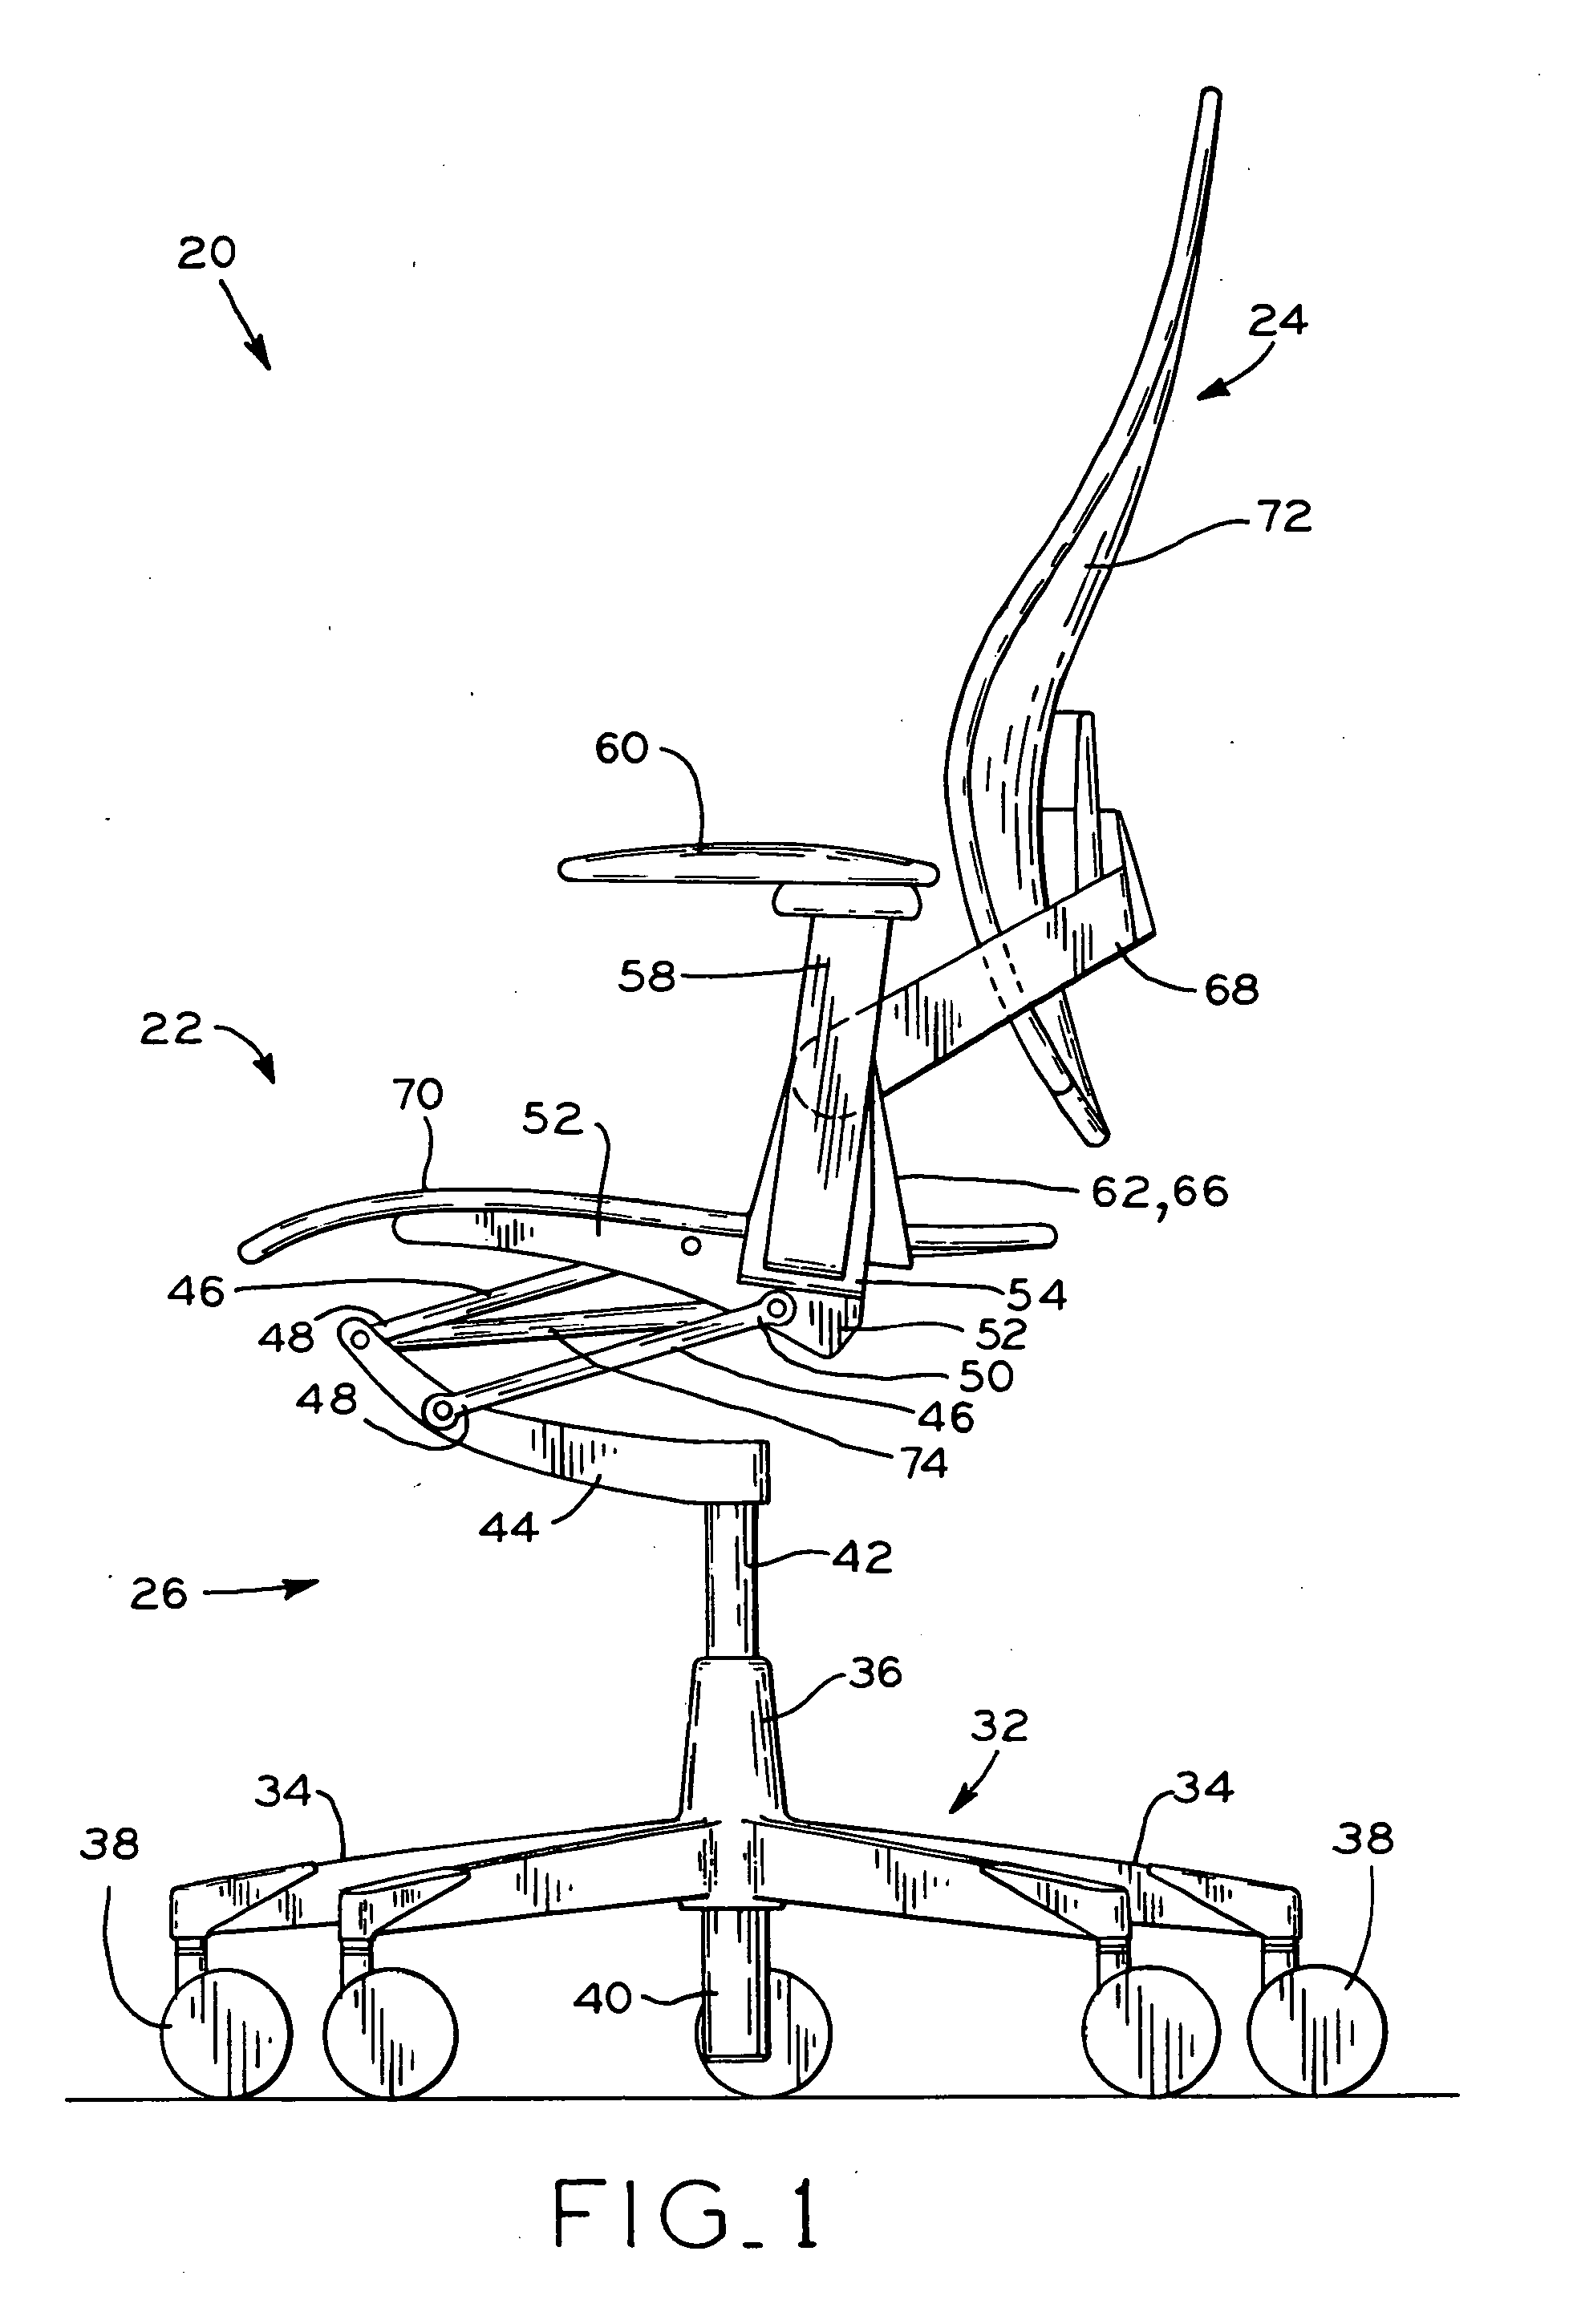 Chair with lumbar support and conforming back